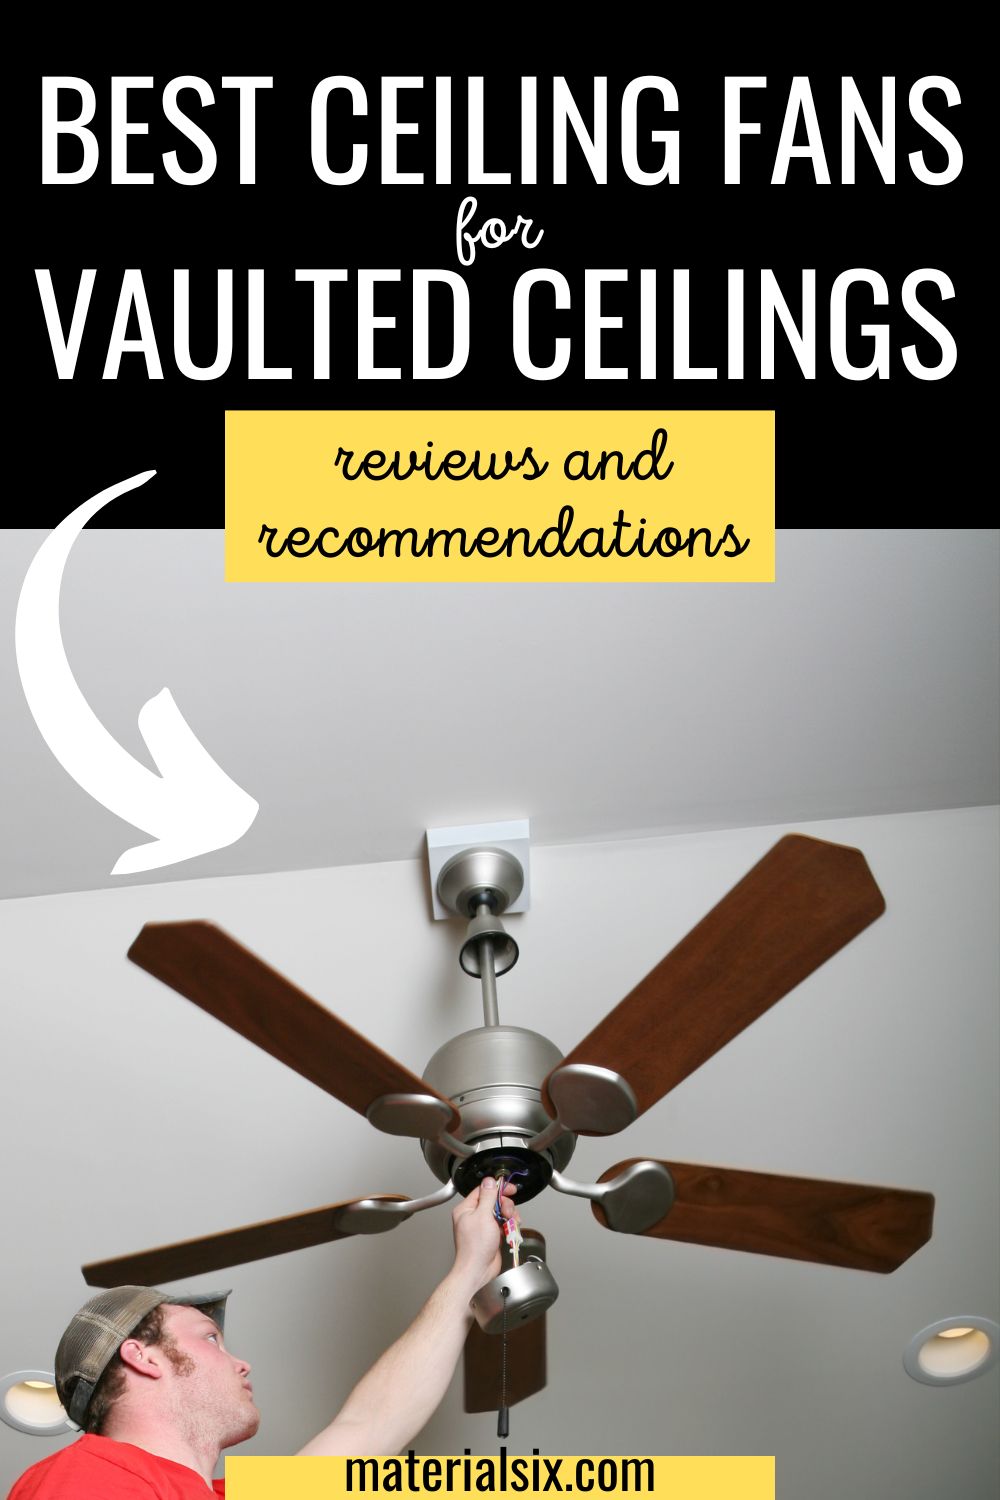 Best Ceiling Fans For Vaulted Ceilings